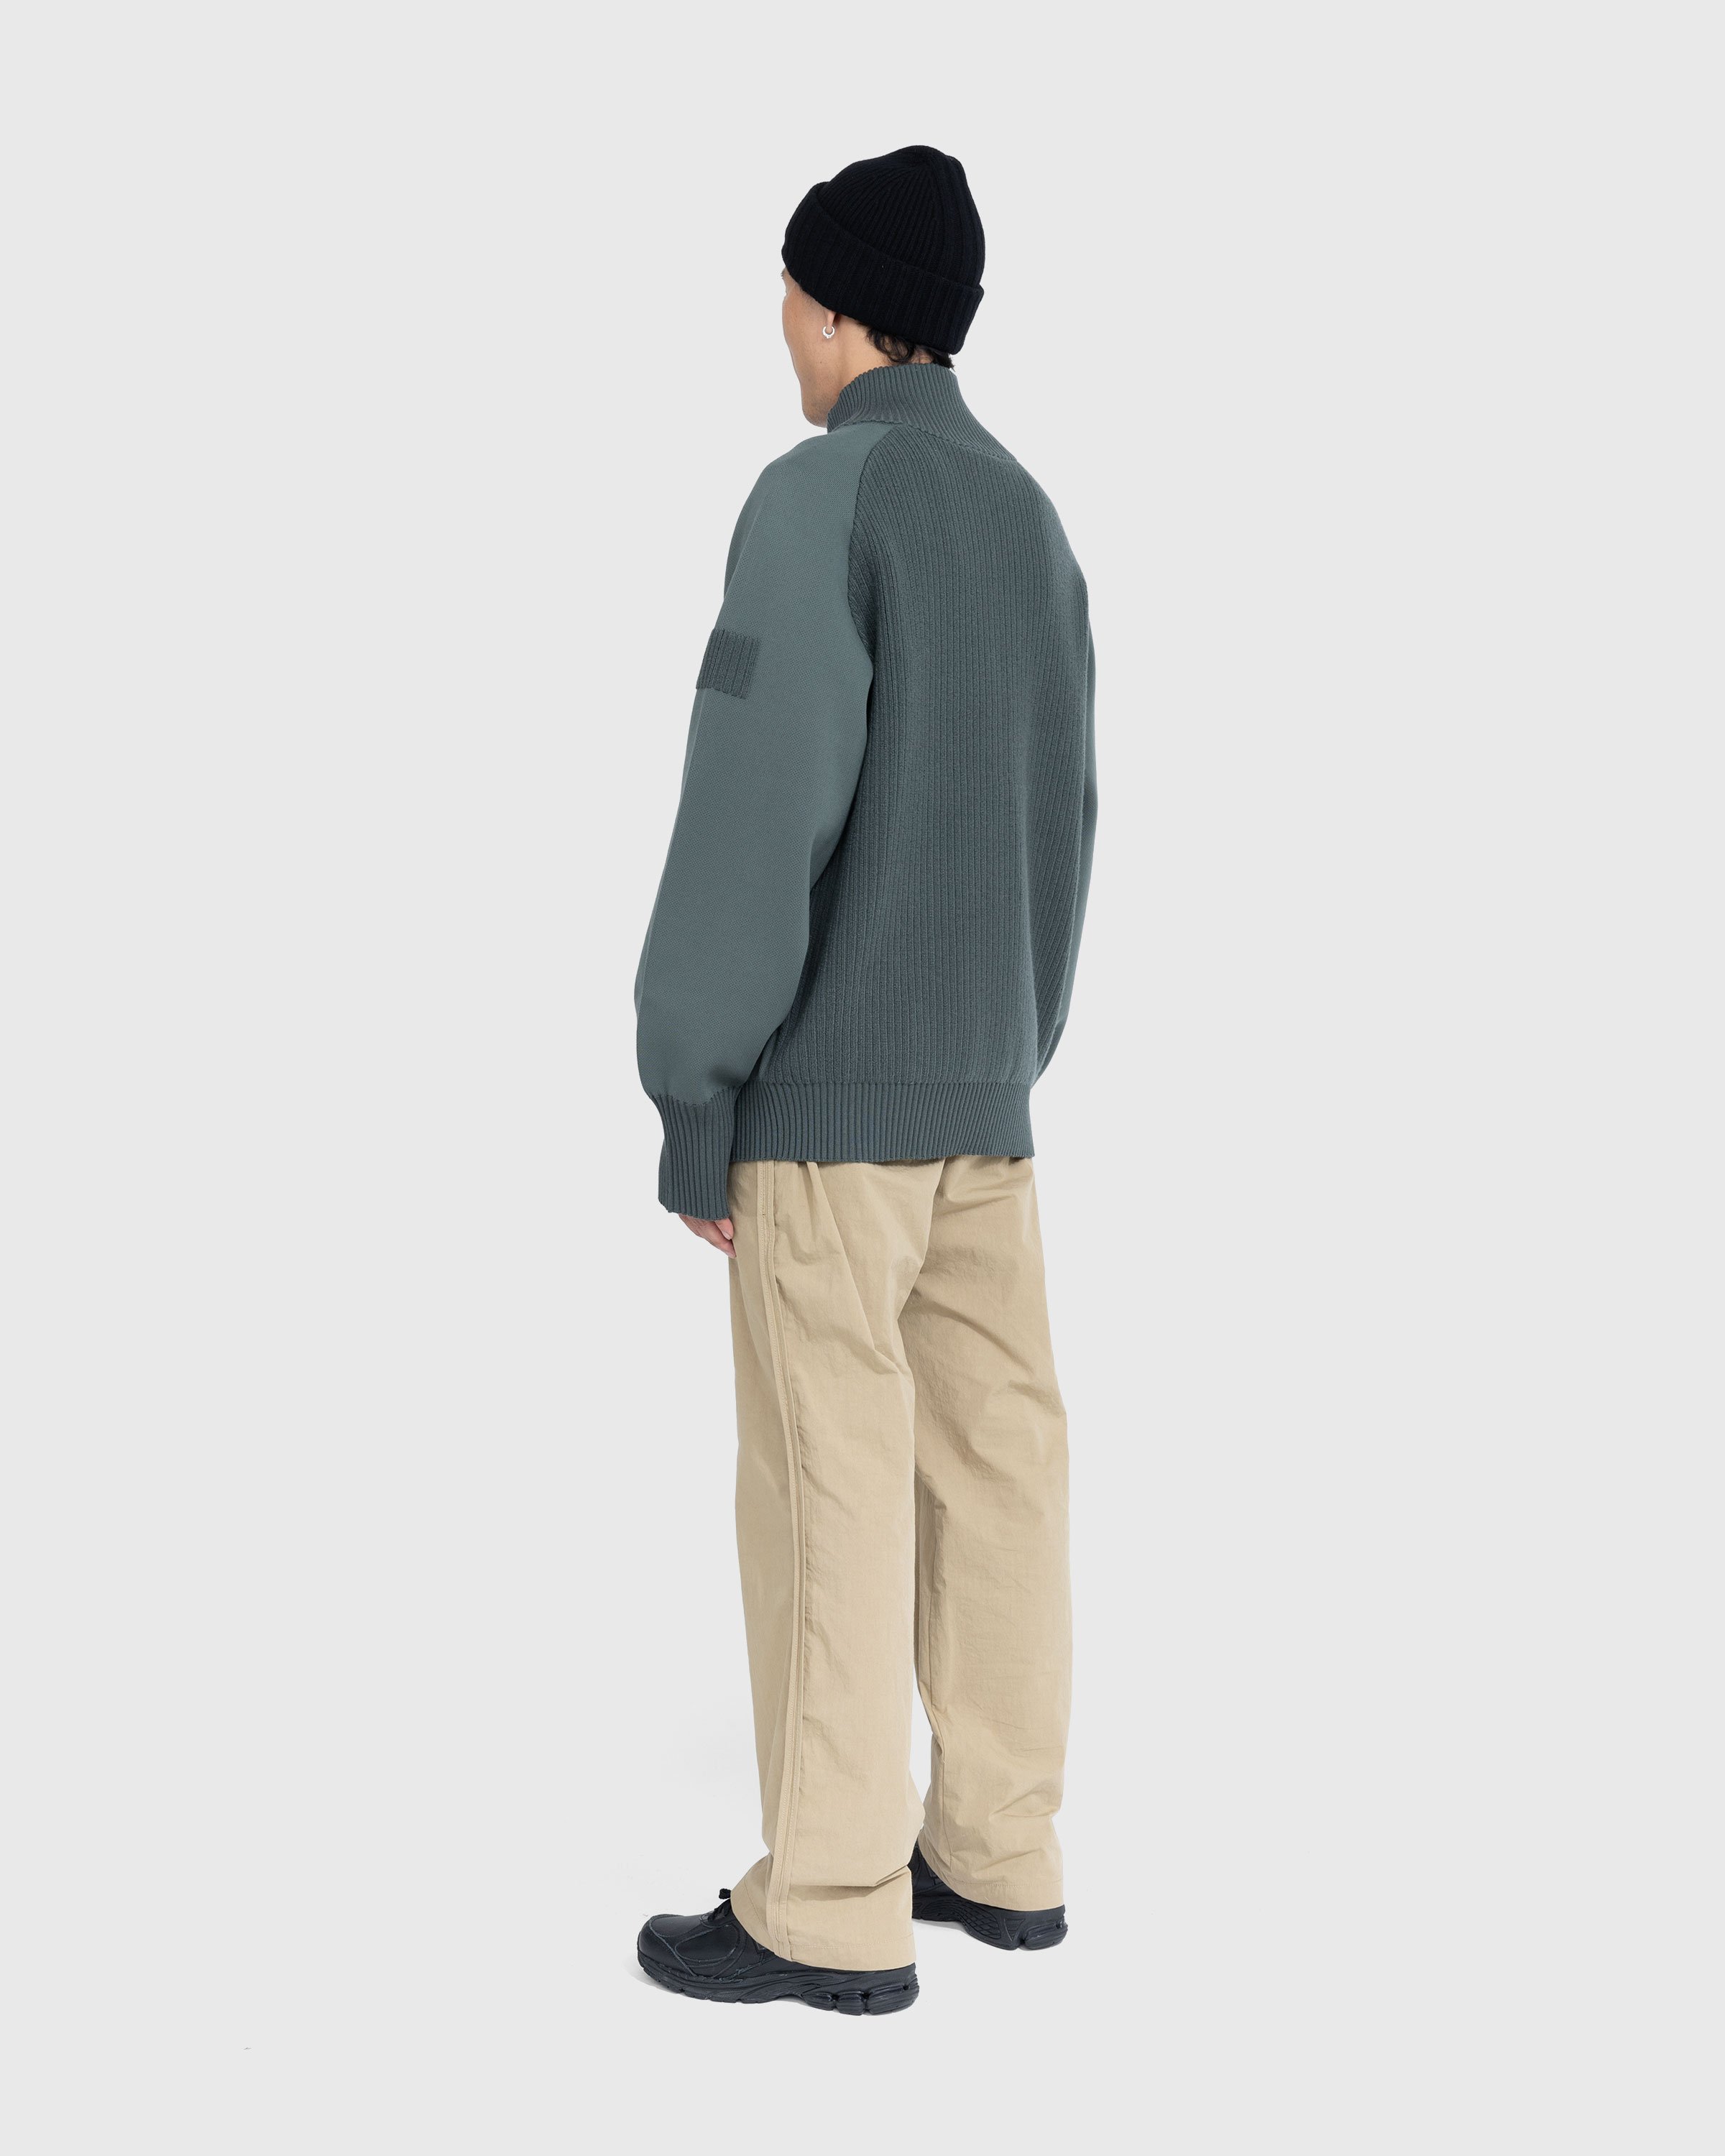 Y-3 - FZ Knit Sweater Stone Green - Clothing - Green - Image 4